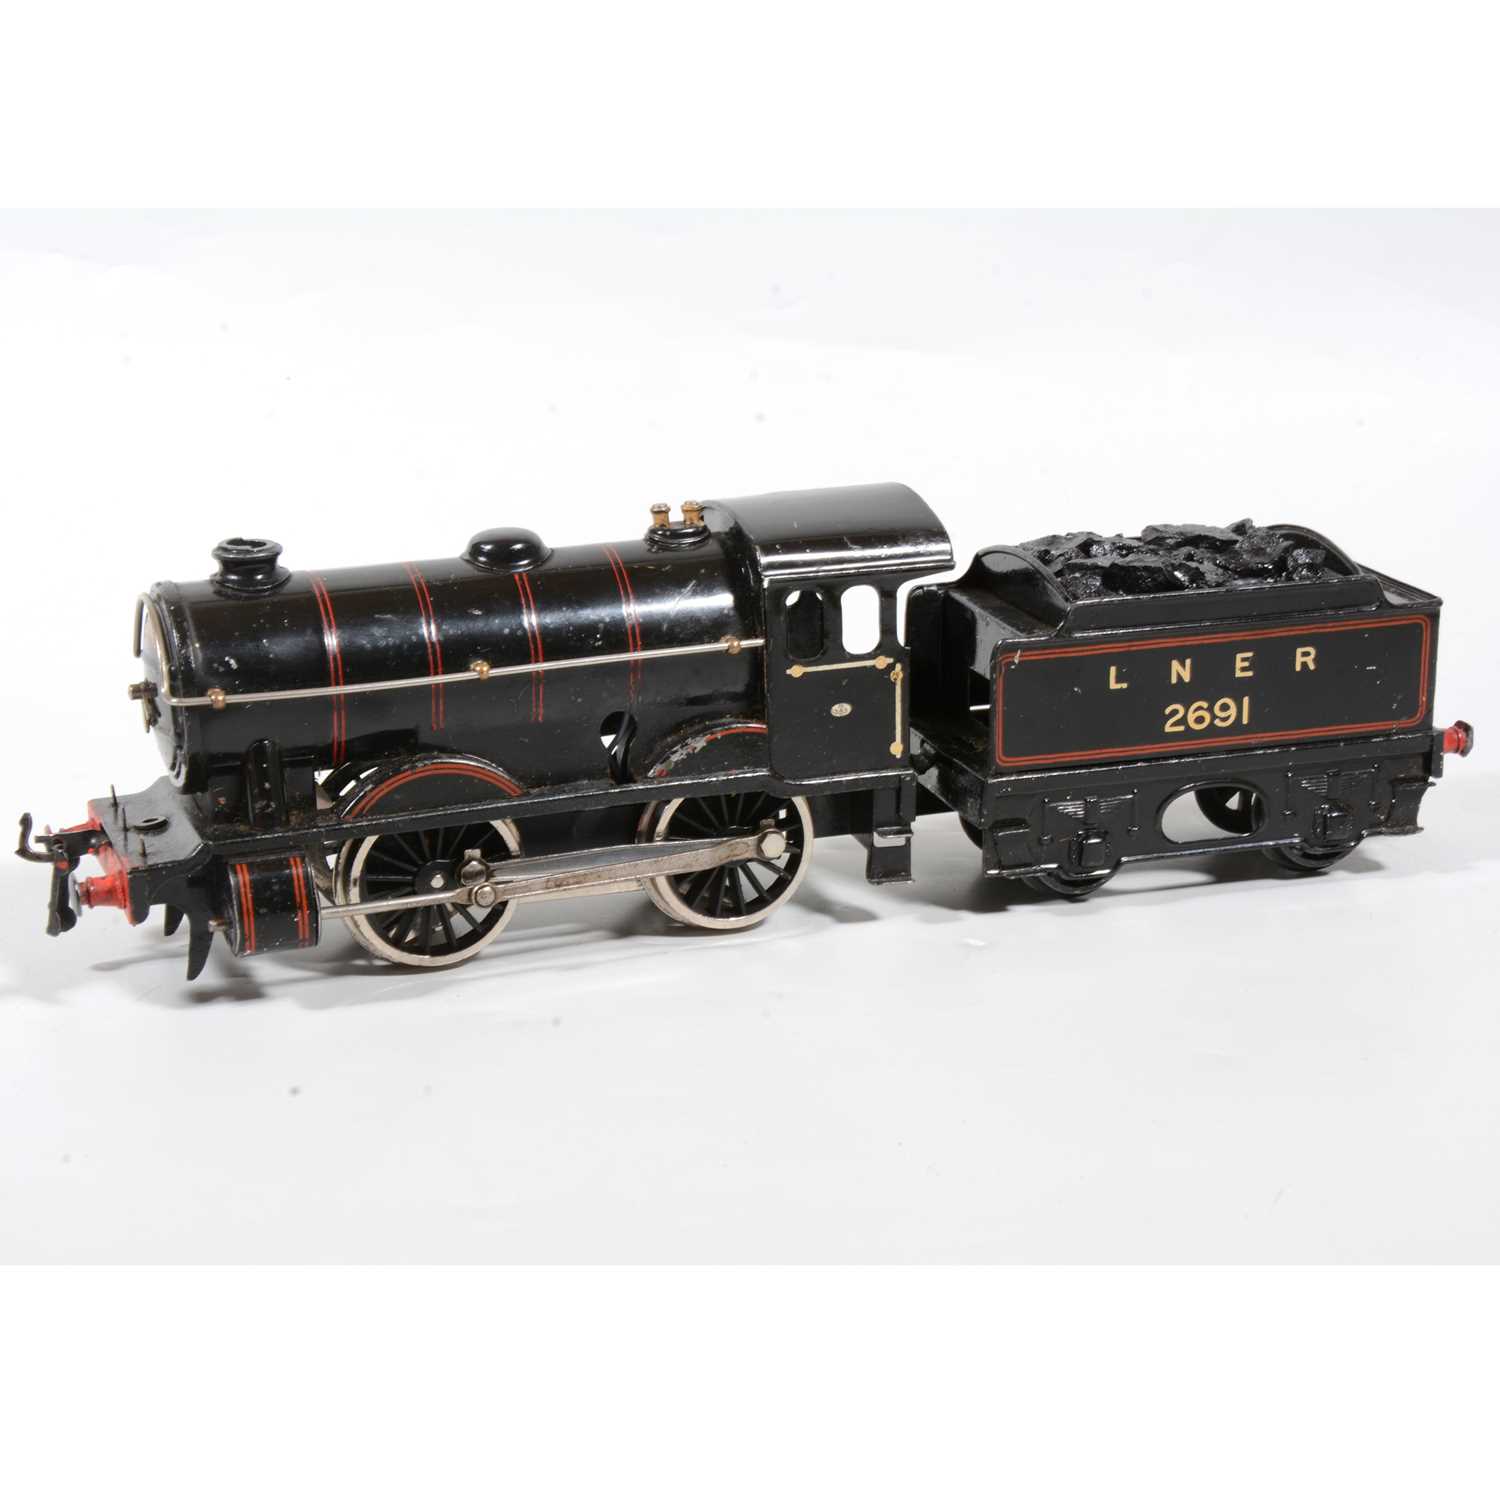 Lot 17 - Hornby O Gauge locomotive with tender, no.1 Special, 0-4-0, LNER black, 2691, converted to electric.